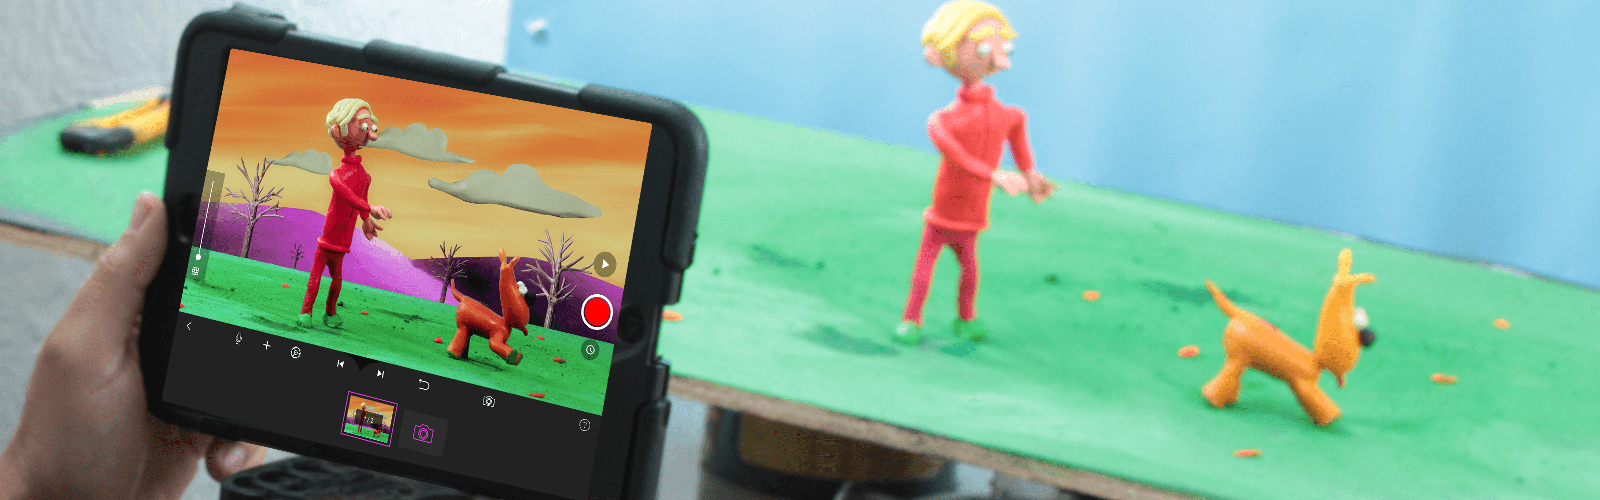 create your own stop motion animation online